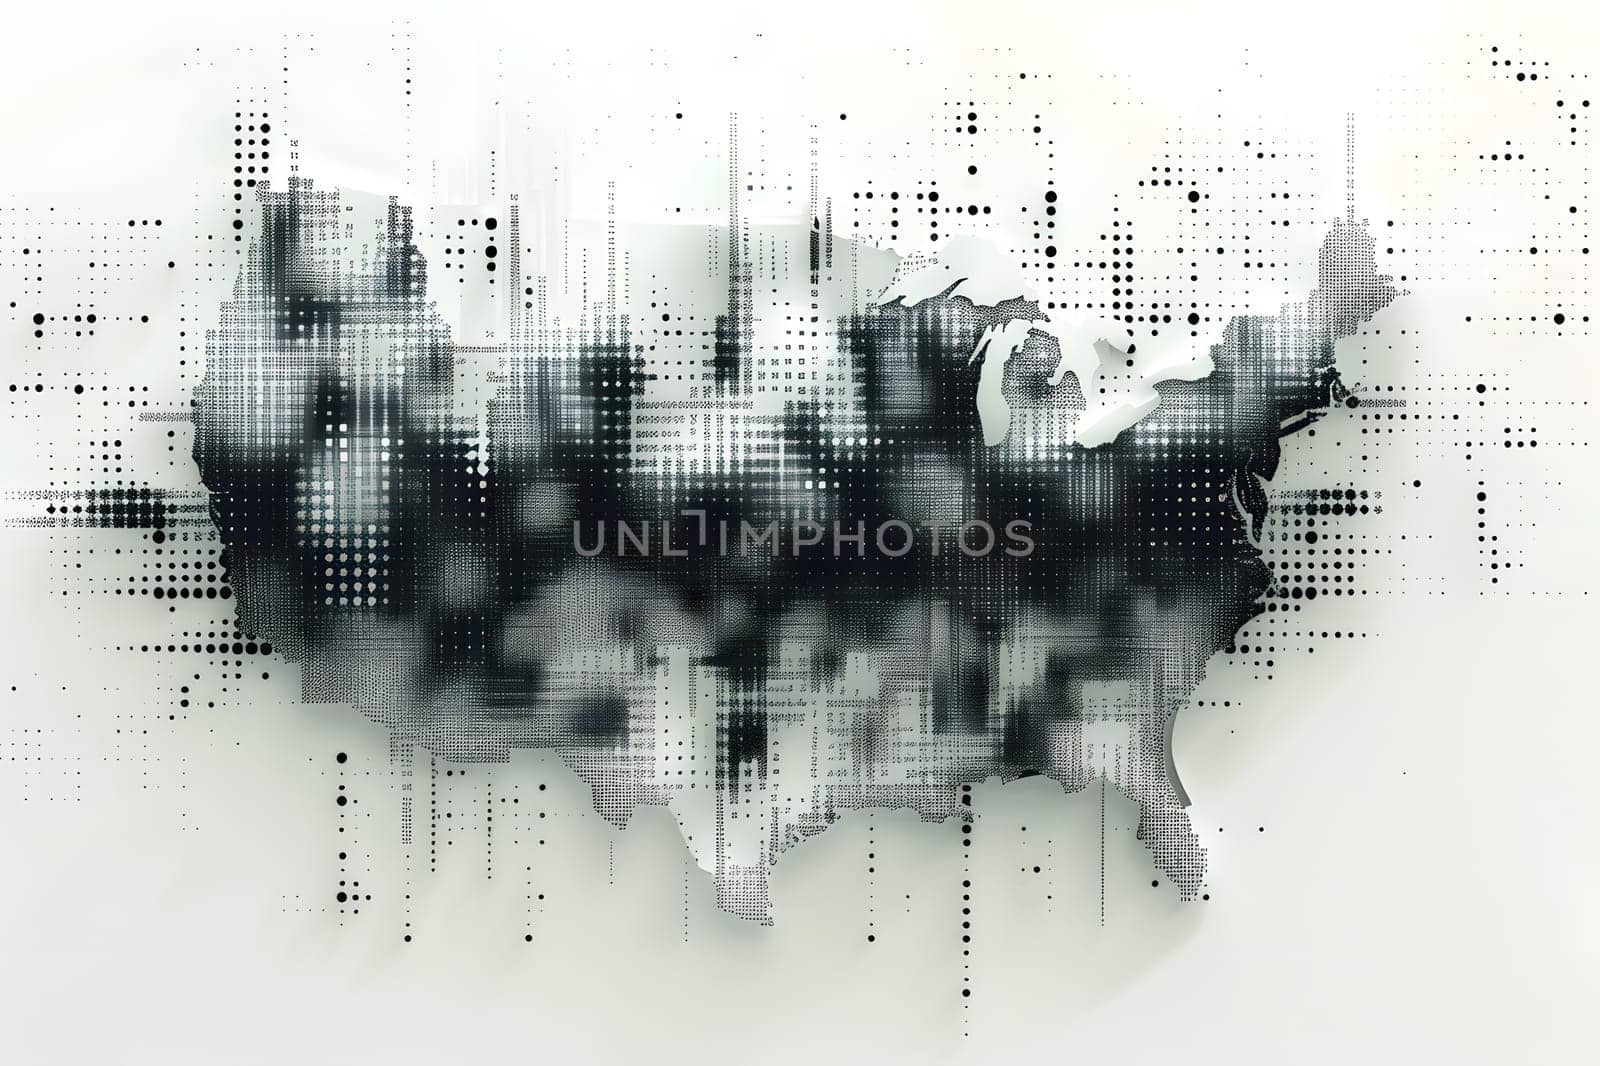 A black and white monochrome painting of a map of the United States, featuring intricate patterns and details in a rectangular format. A captivating piece of visual art